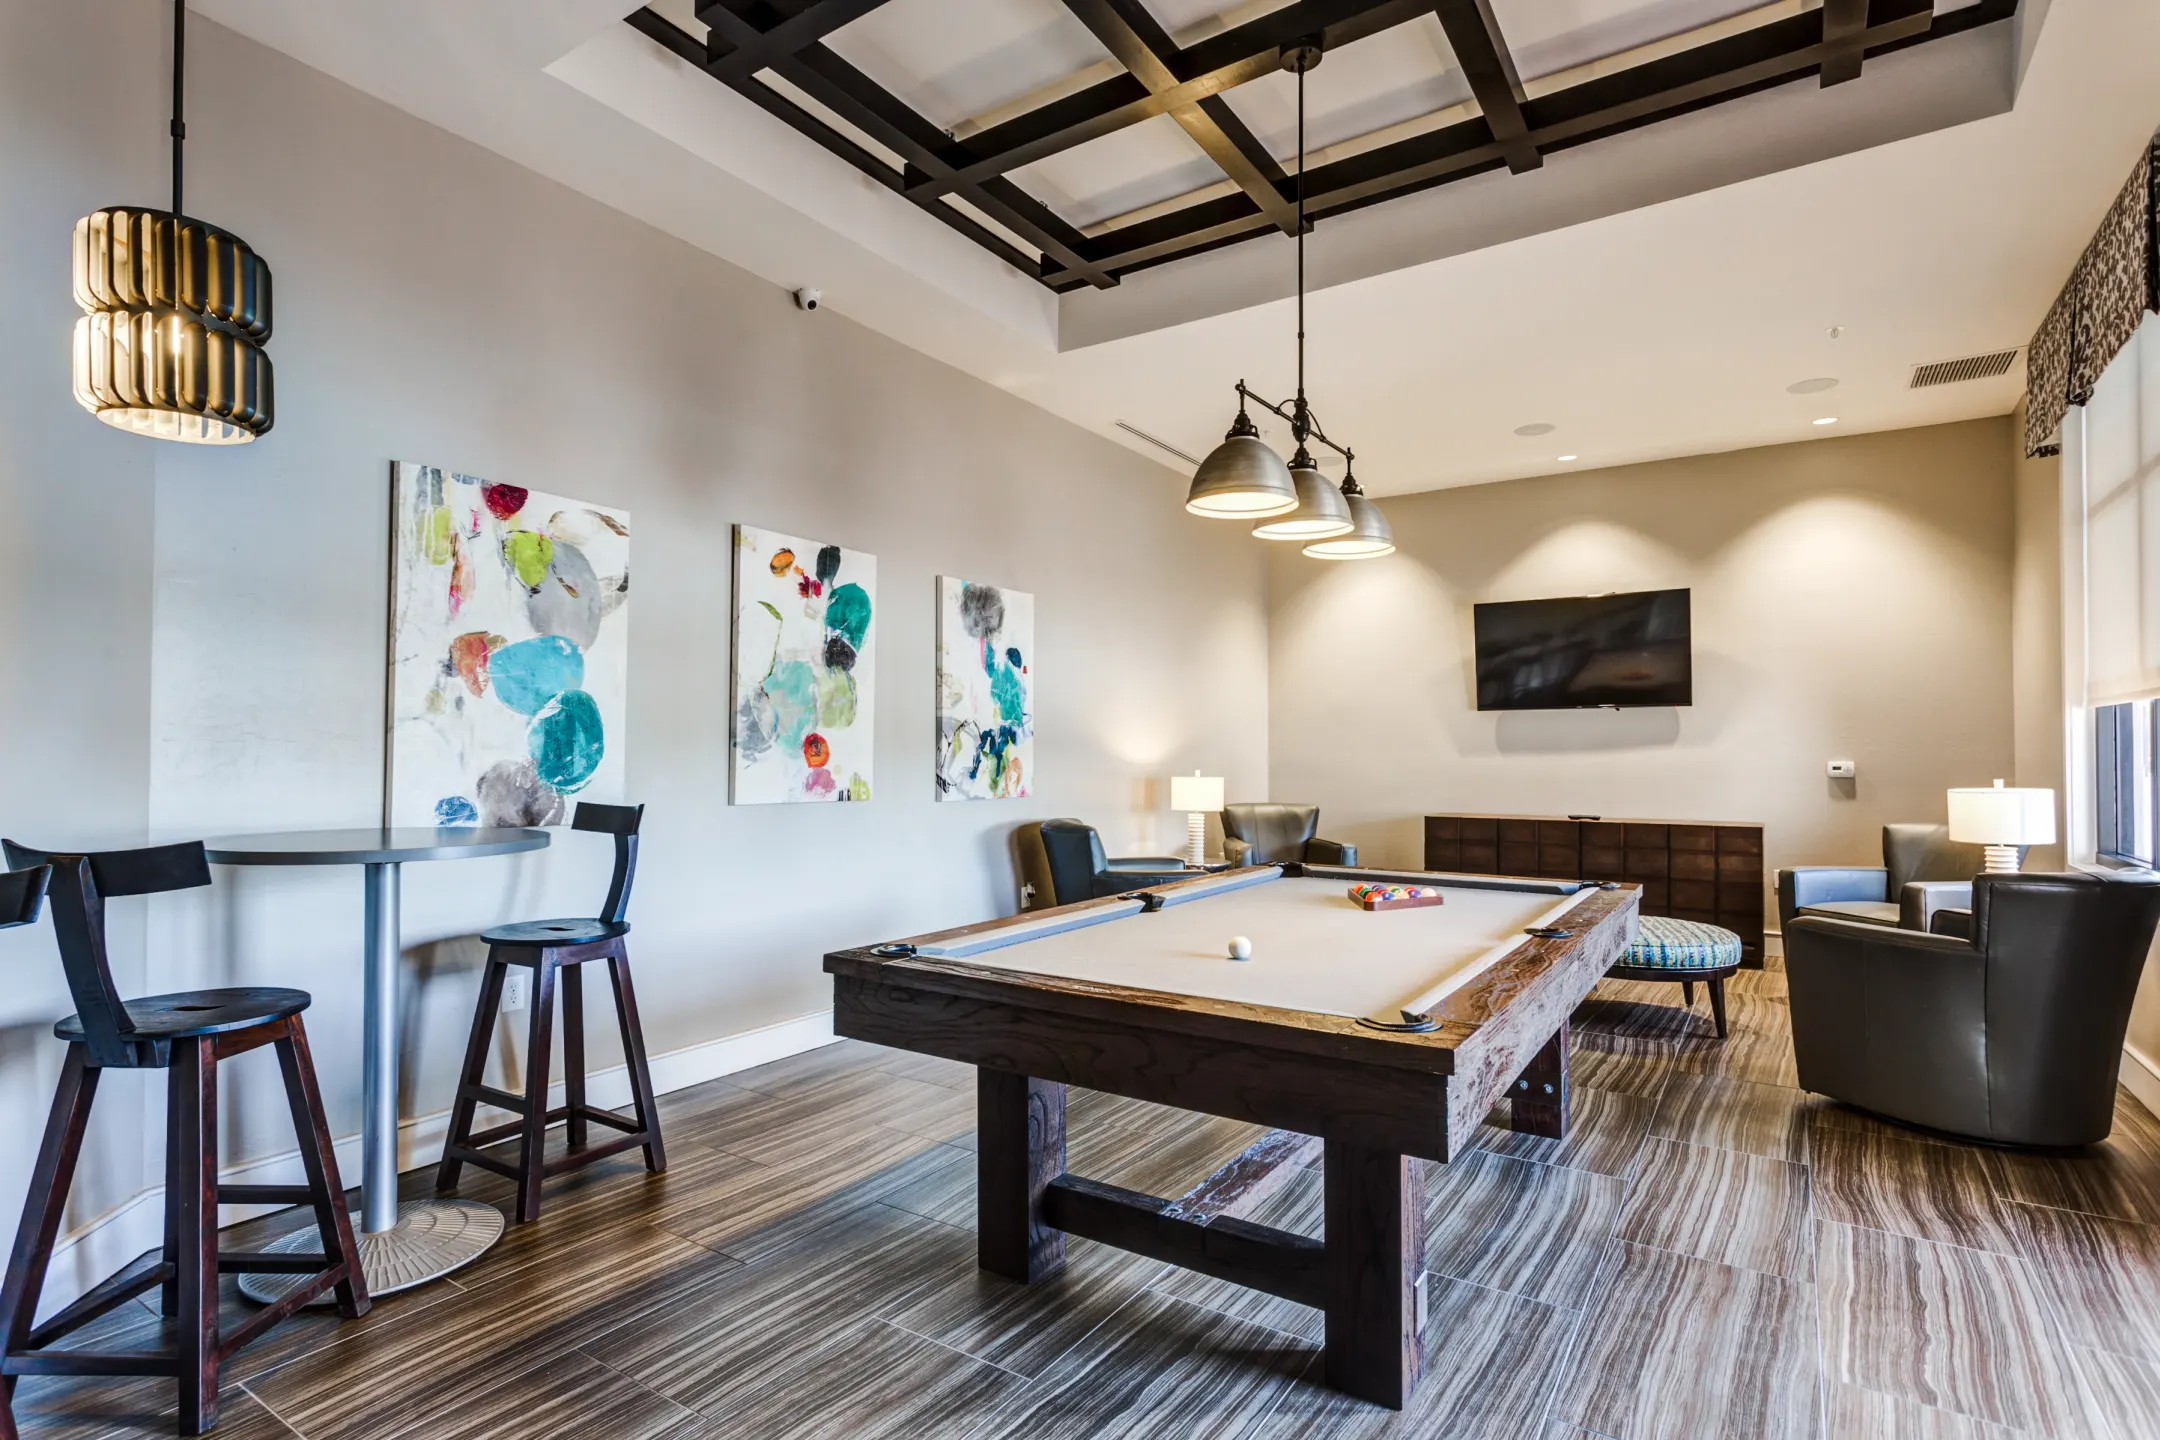 Gaming Center - Channelside Contemporary Living Apartments - Fort Myers, FL